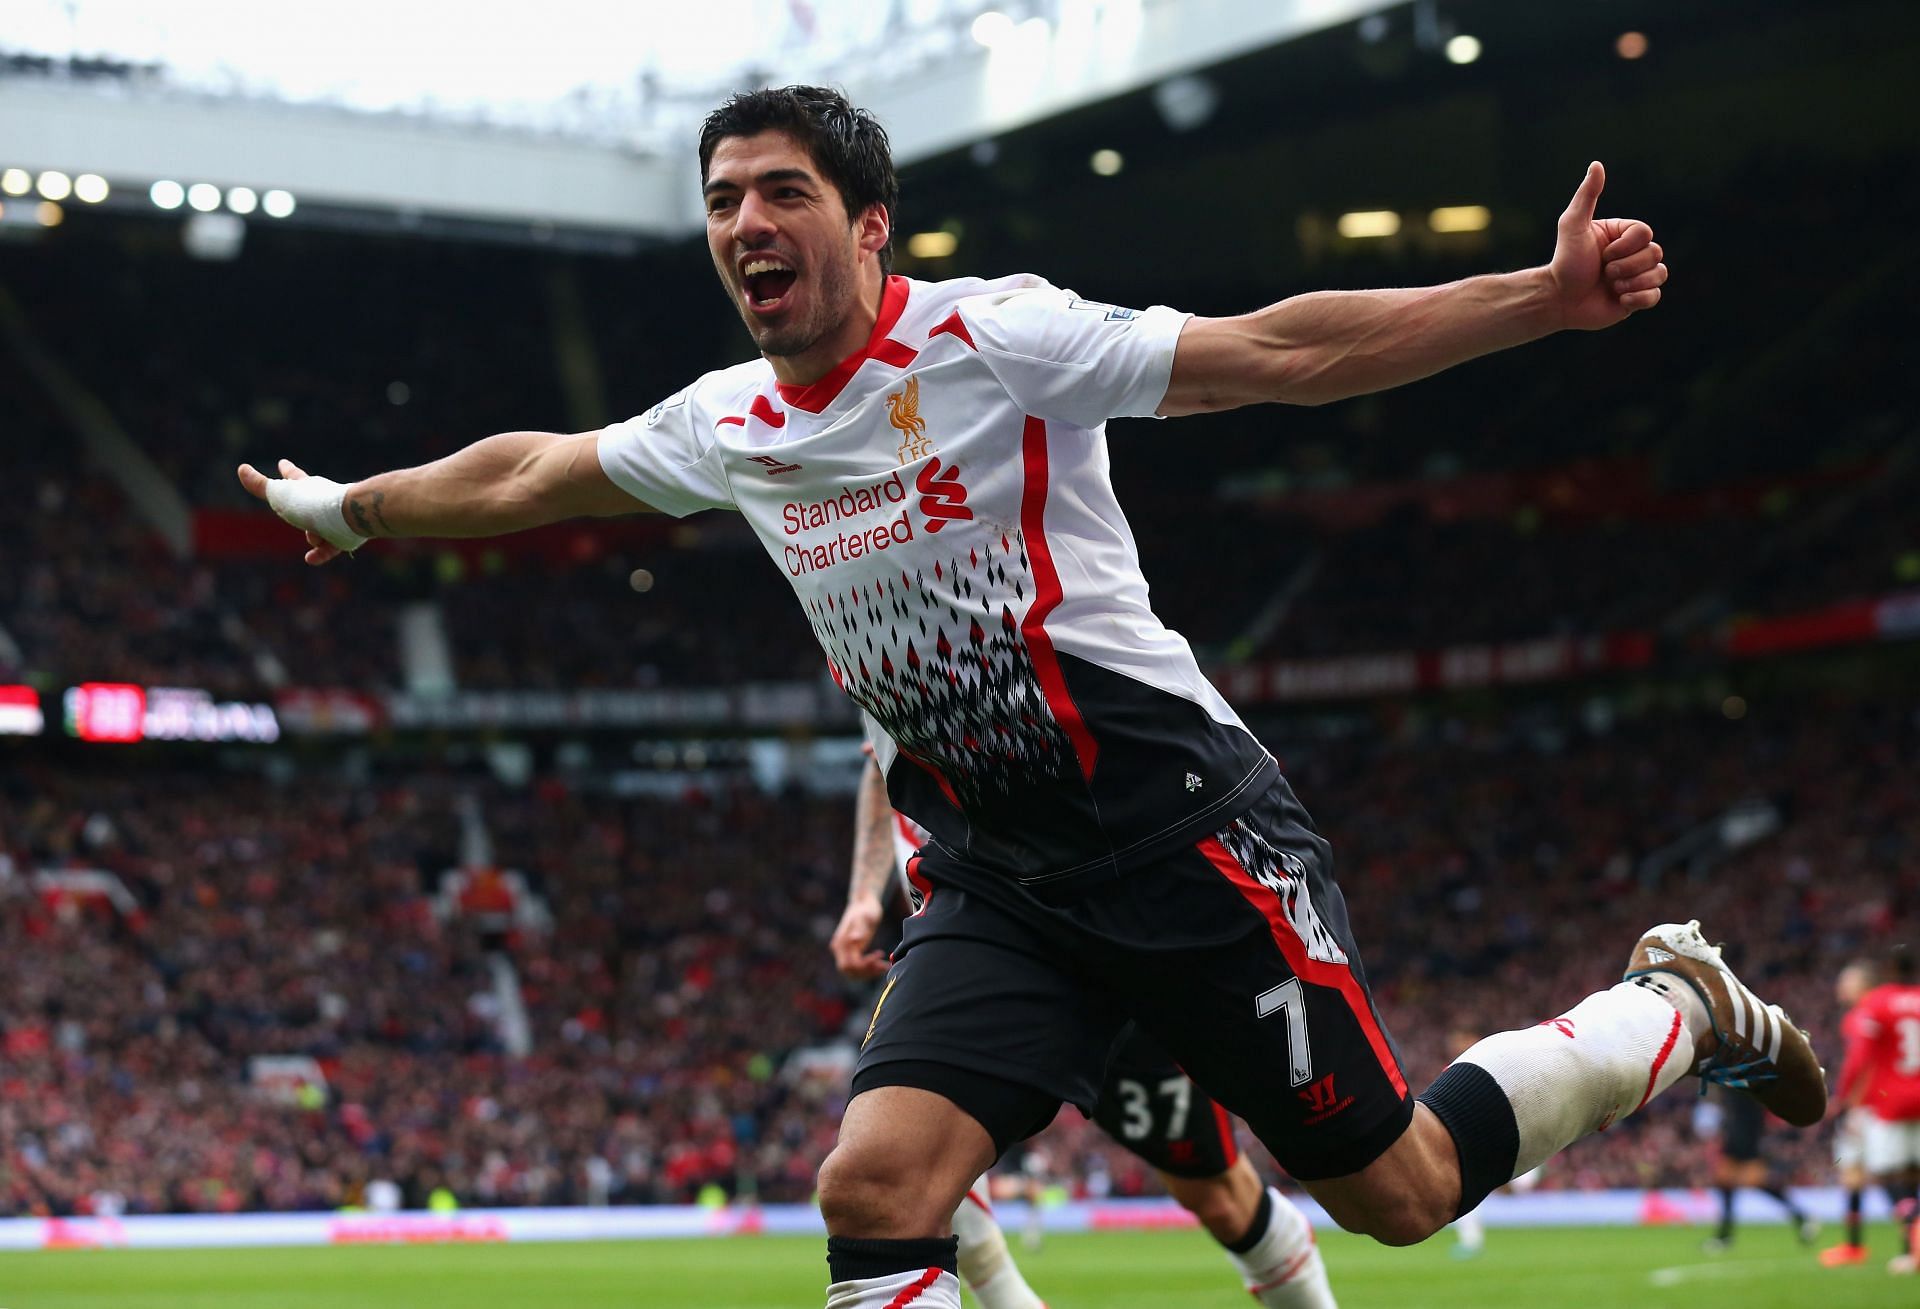 Suarez was incredible for the Reds